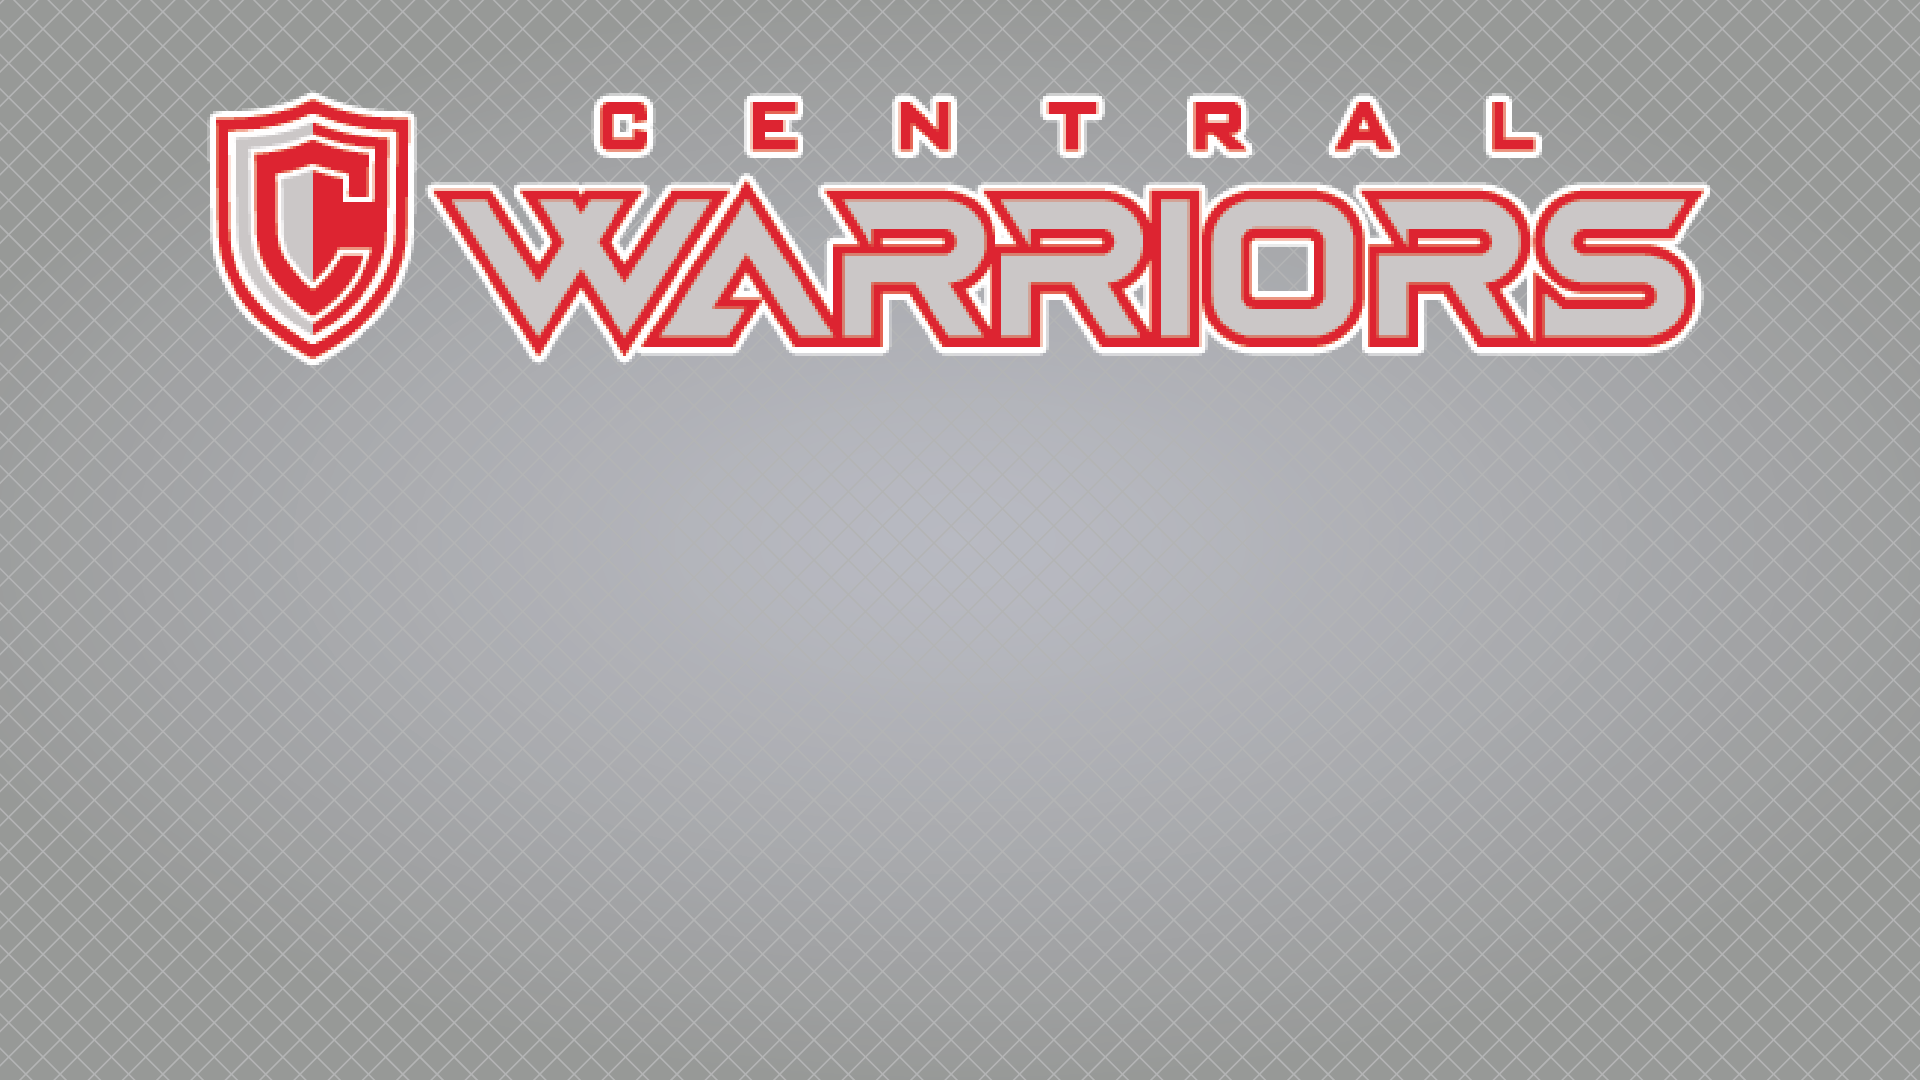 Central sophomores showcase growth at Warrior Classic